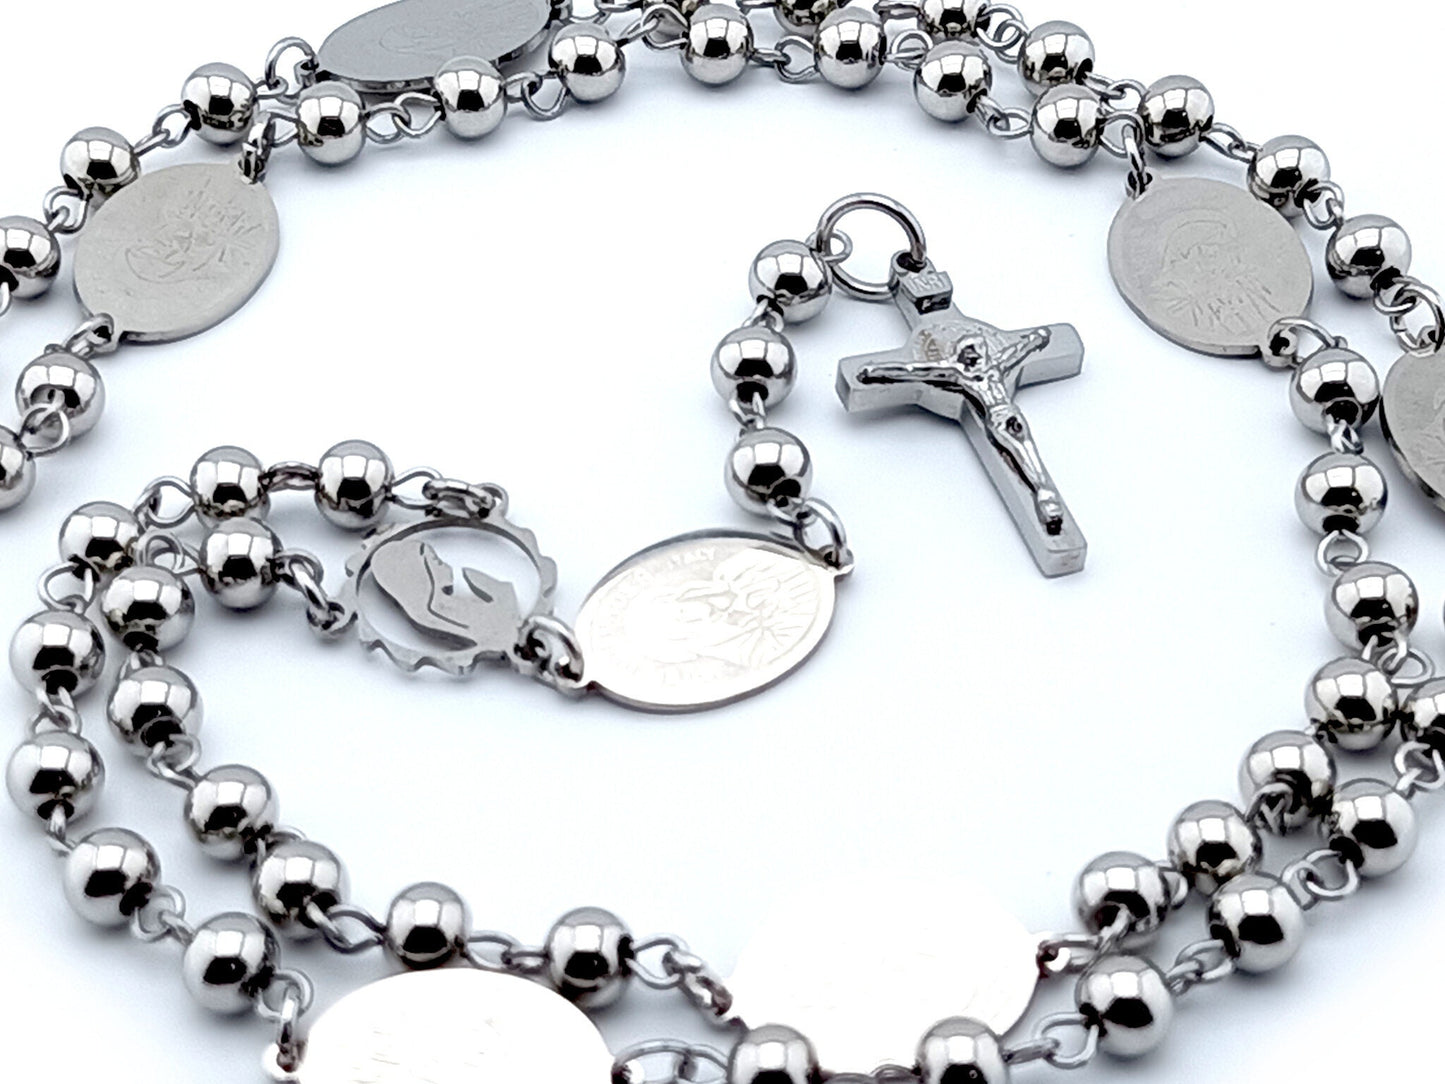 Our Lady of Sorrows unique rosary beads with stainless steel beads, wire , laser cut centre medal, crucifix and medals.